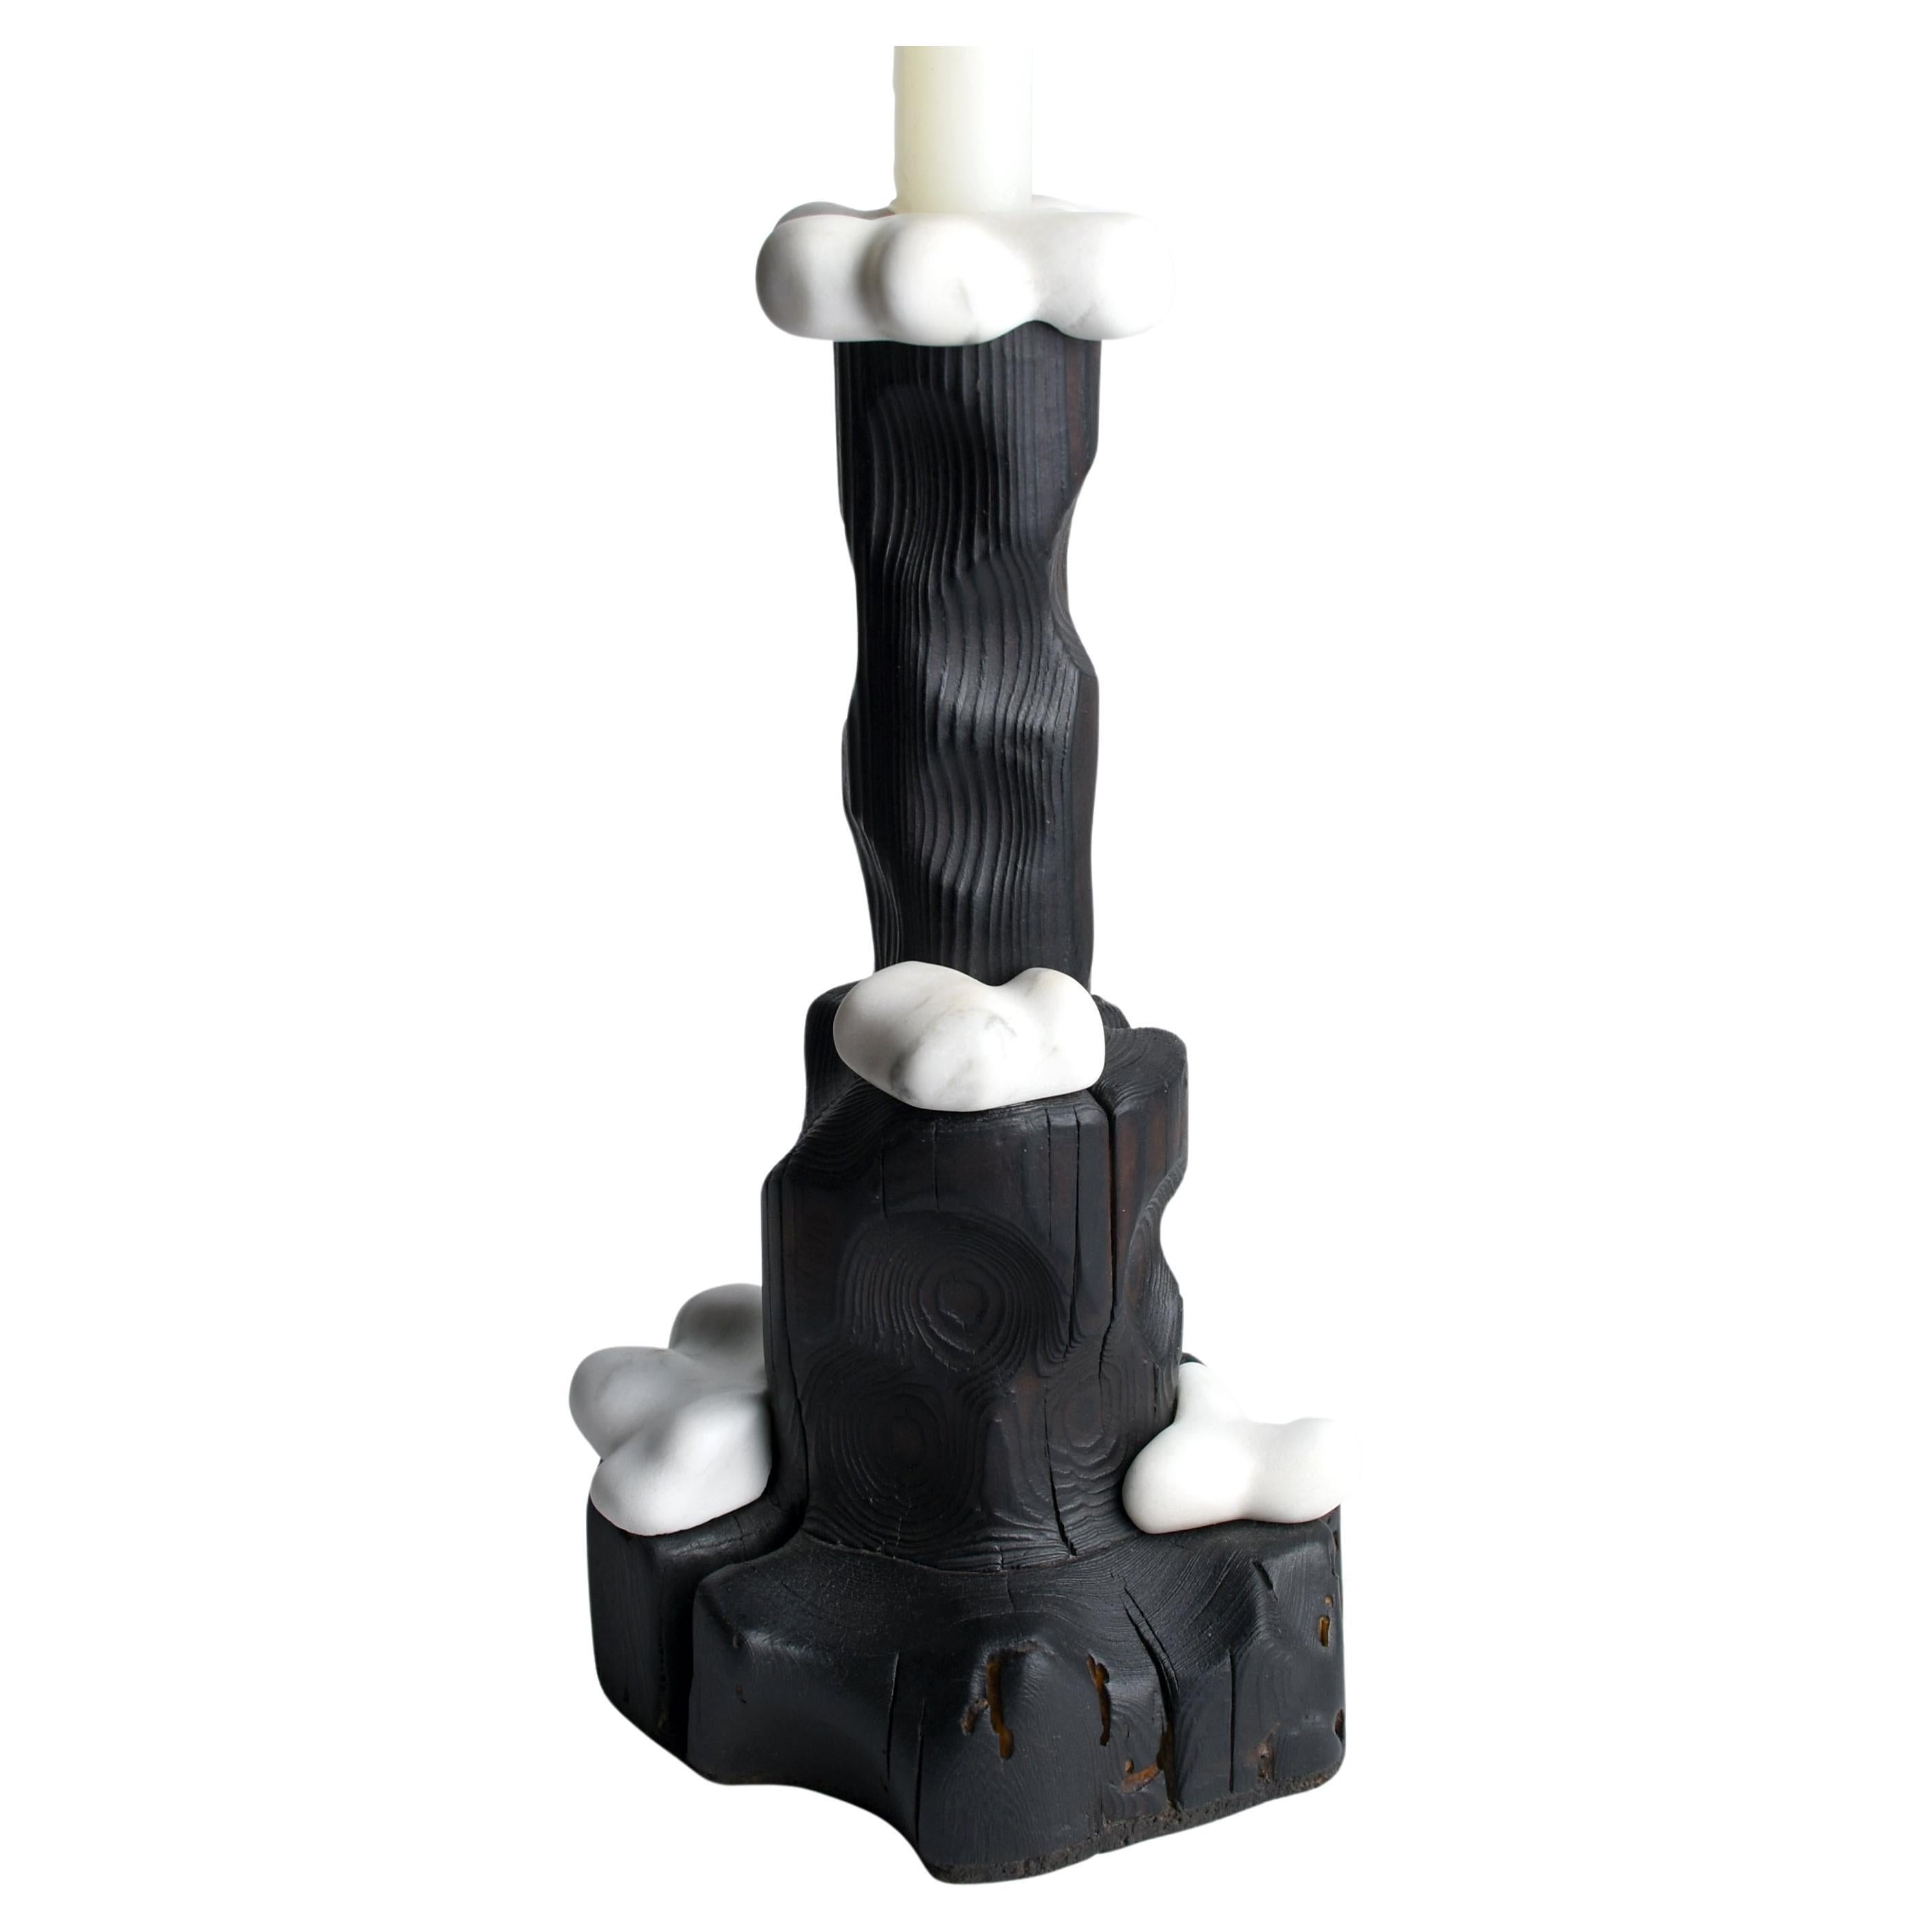 Cumulus, Sculptured Candle Holder from Reclaimed Burned Wood and White Marble For Sale